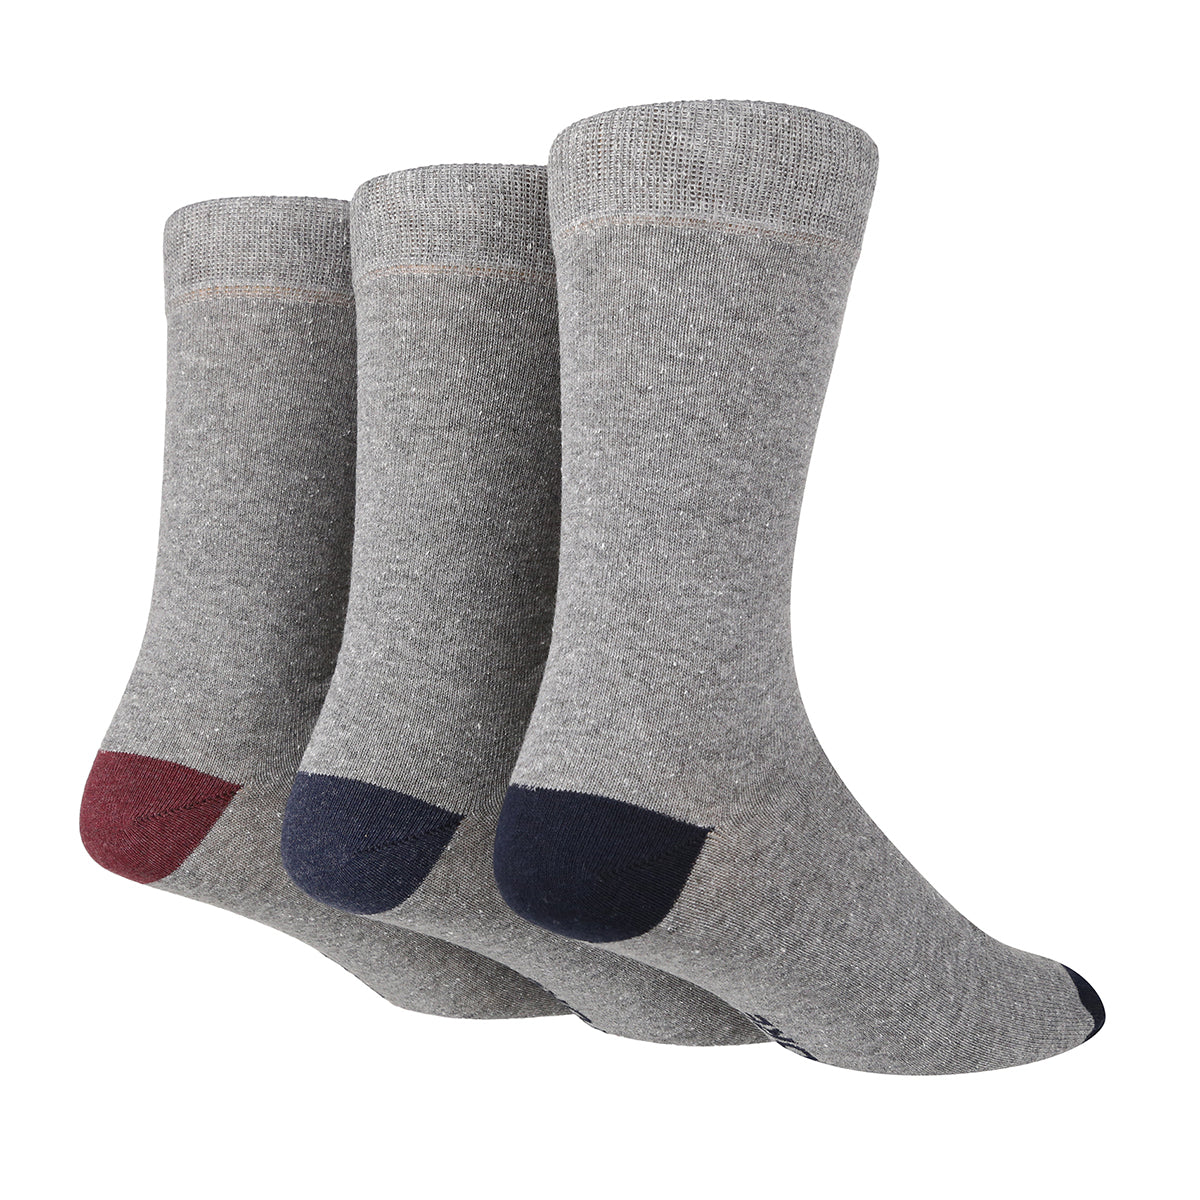 Men's Plain Socks with Contrast Heel and Toe - 3 Pairs